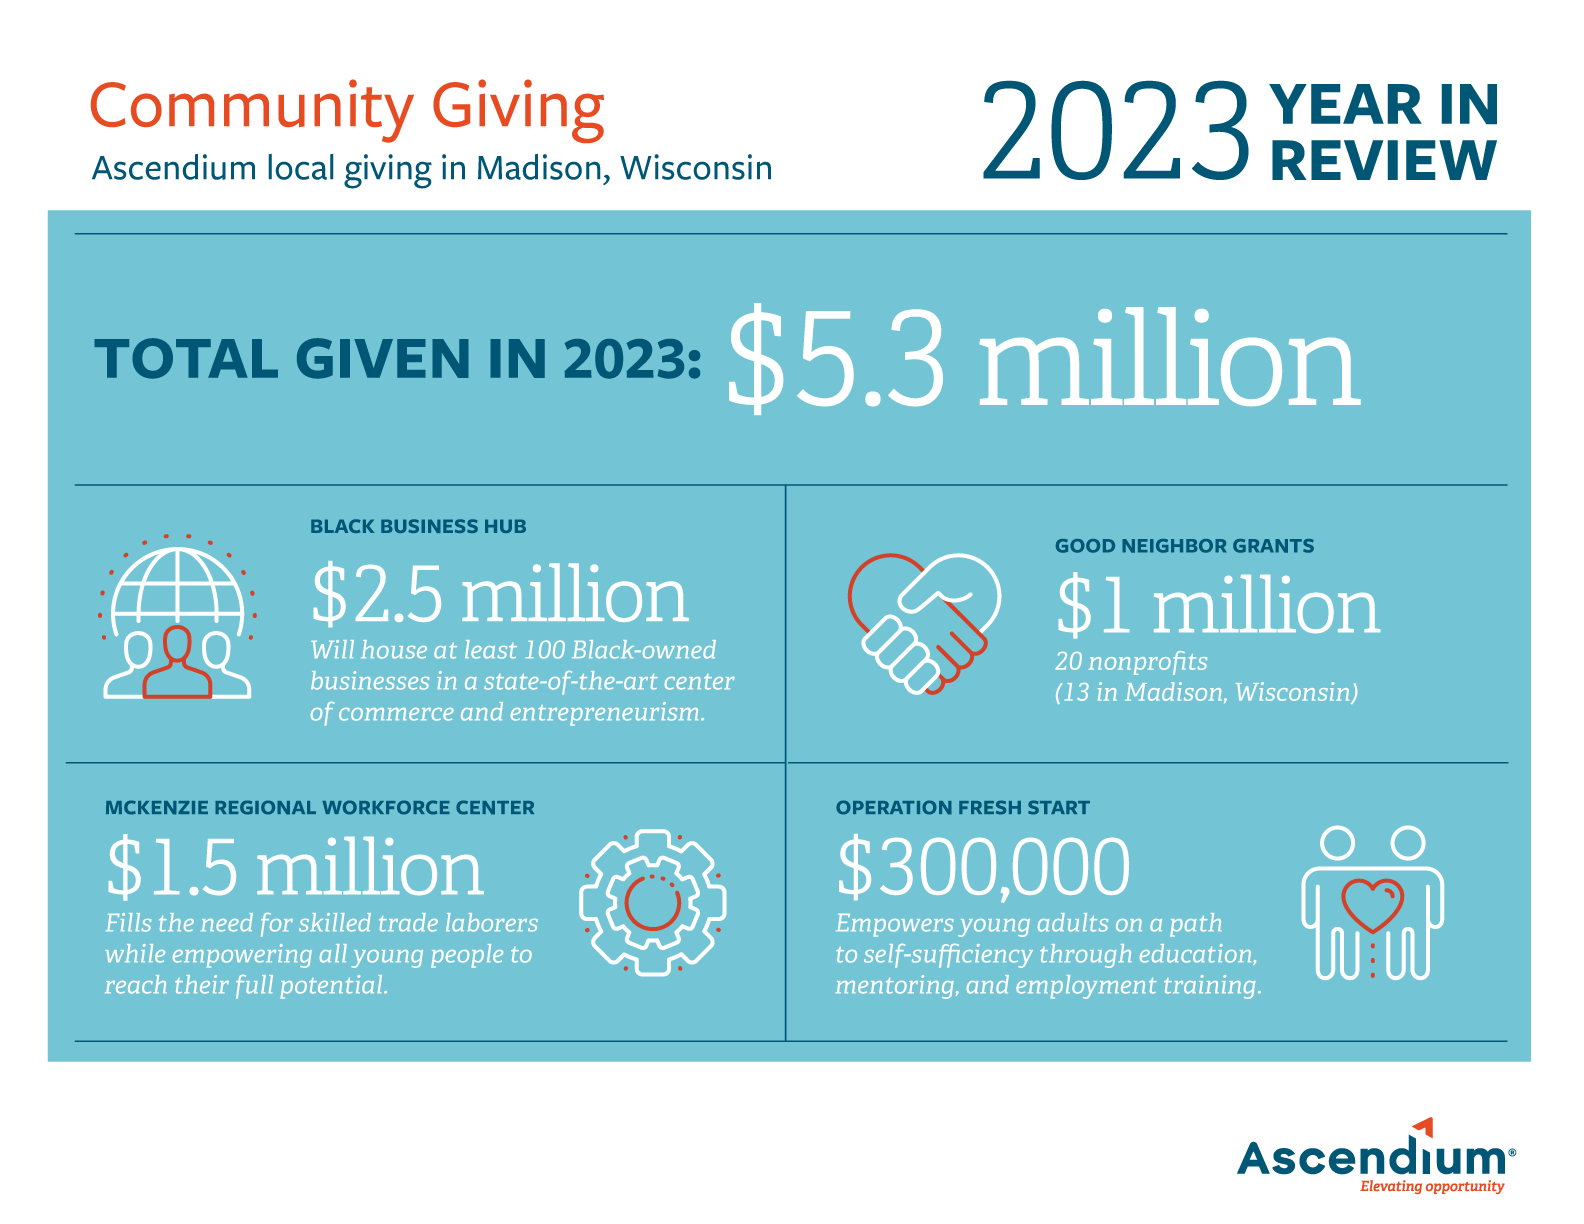 A 2023 year-in-review infographic displaying Ascendium’s local giving in Madison, Wisconsin, with $5.3 million of total giving in 2023. $2.5 million went to the Black Business Hub, which will house at least 100 Black-owned businesses in a state-of-the-art center of commerce and entrepreneurism. $1.5 million went to the McKenzie Regional Workforce Center, which fills the need for skilled trade laborers while empowering all young people to reach their full potential. $1 million of Good Neighbor Grants went to 20 nonprofits, 13 of which are in Madison, Wisconsin. $300,000 went to Operation Fresh Start, which empowers young adults on a path to self-sufficiency through education, mentoring, and employment training.